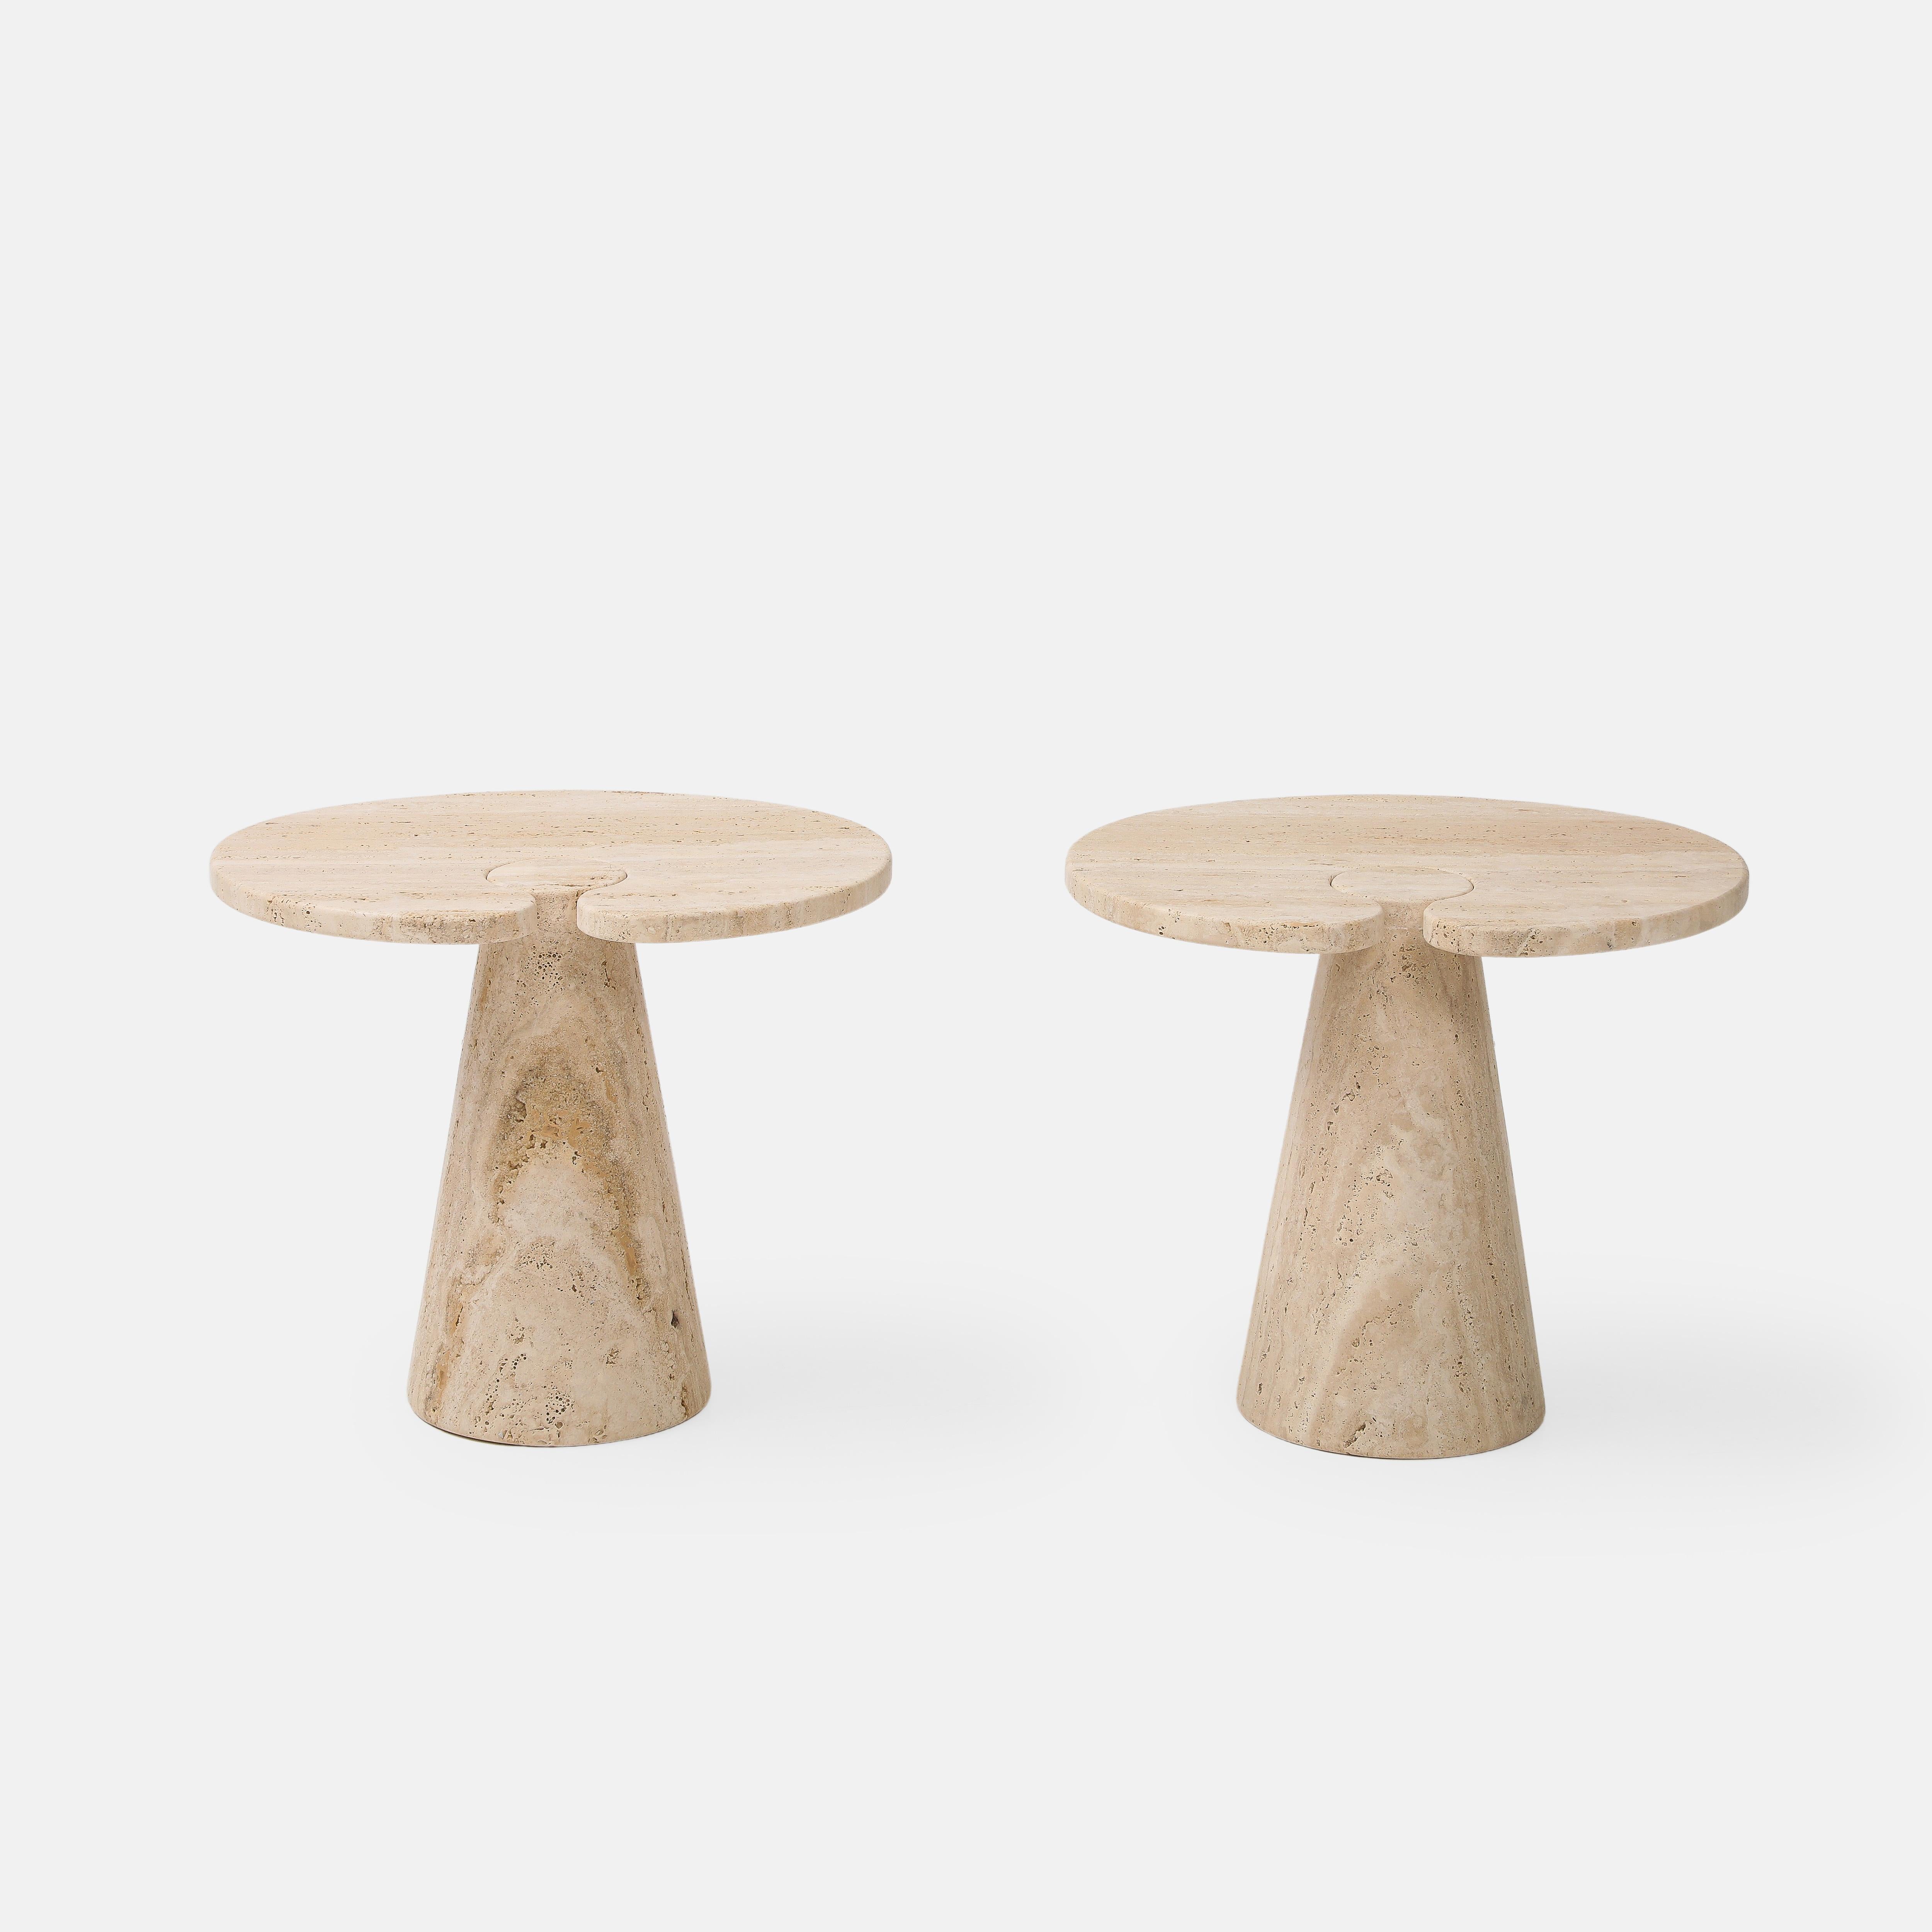 Italian 21st century travertine side tables each with a thick top fitted on a conical base, in the manner of Angelo Mangiarotti. These elegantly organic side tables are made from a beautiful natural stone whose architectural structure is not only